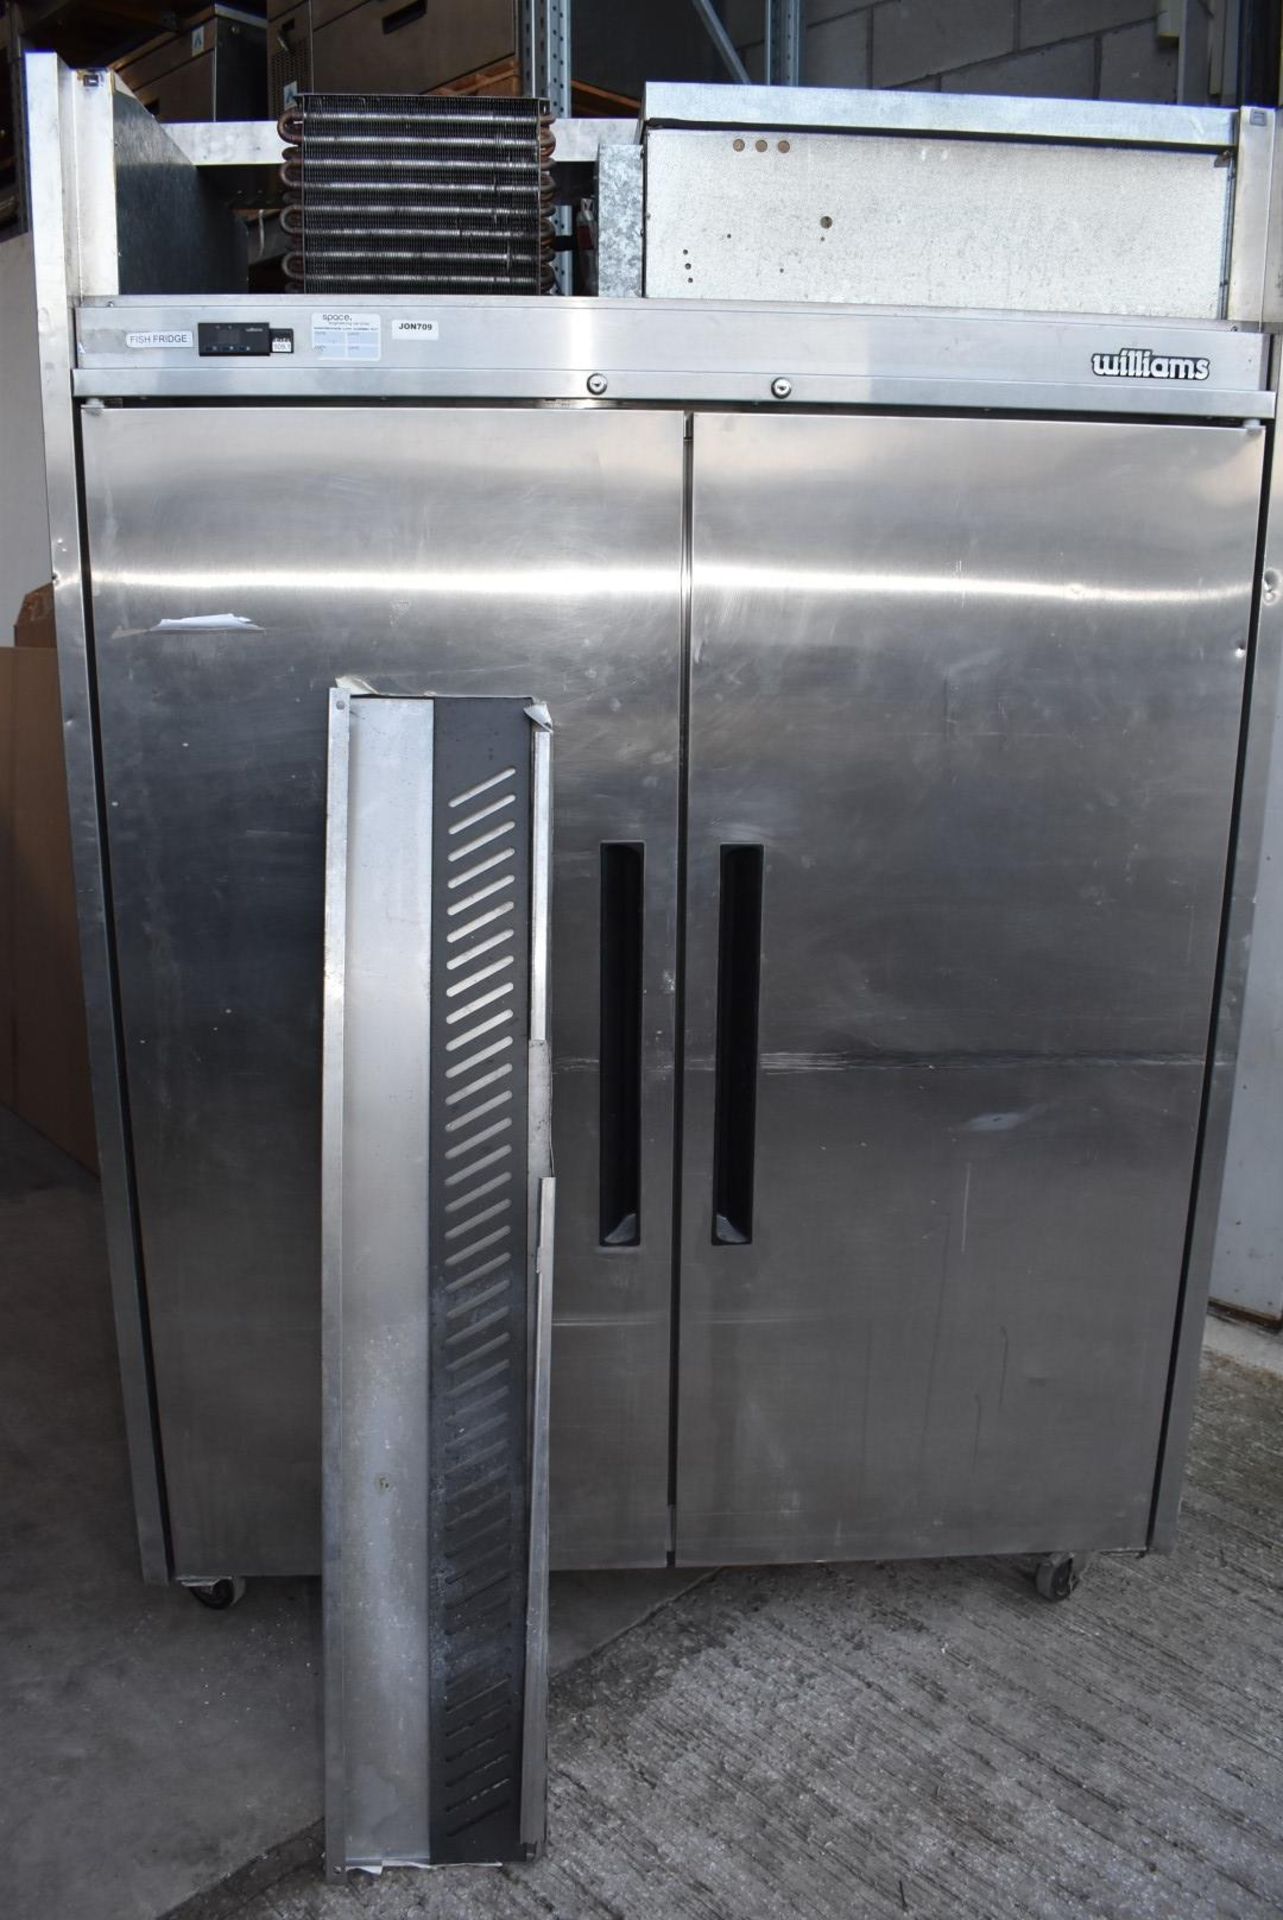 1 x Williams MJ2SA Jade Upright Double Door Refrigerator - Recently Removed From a Working - Image 2 of 8